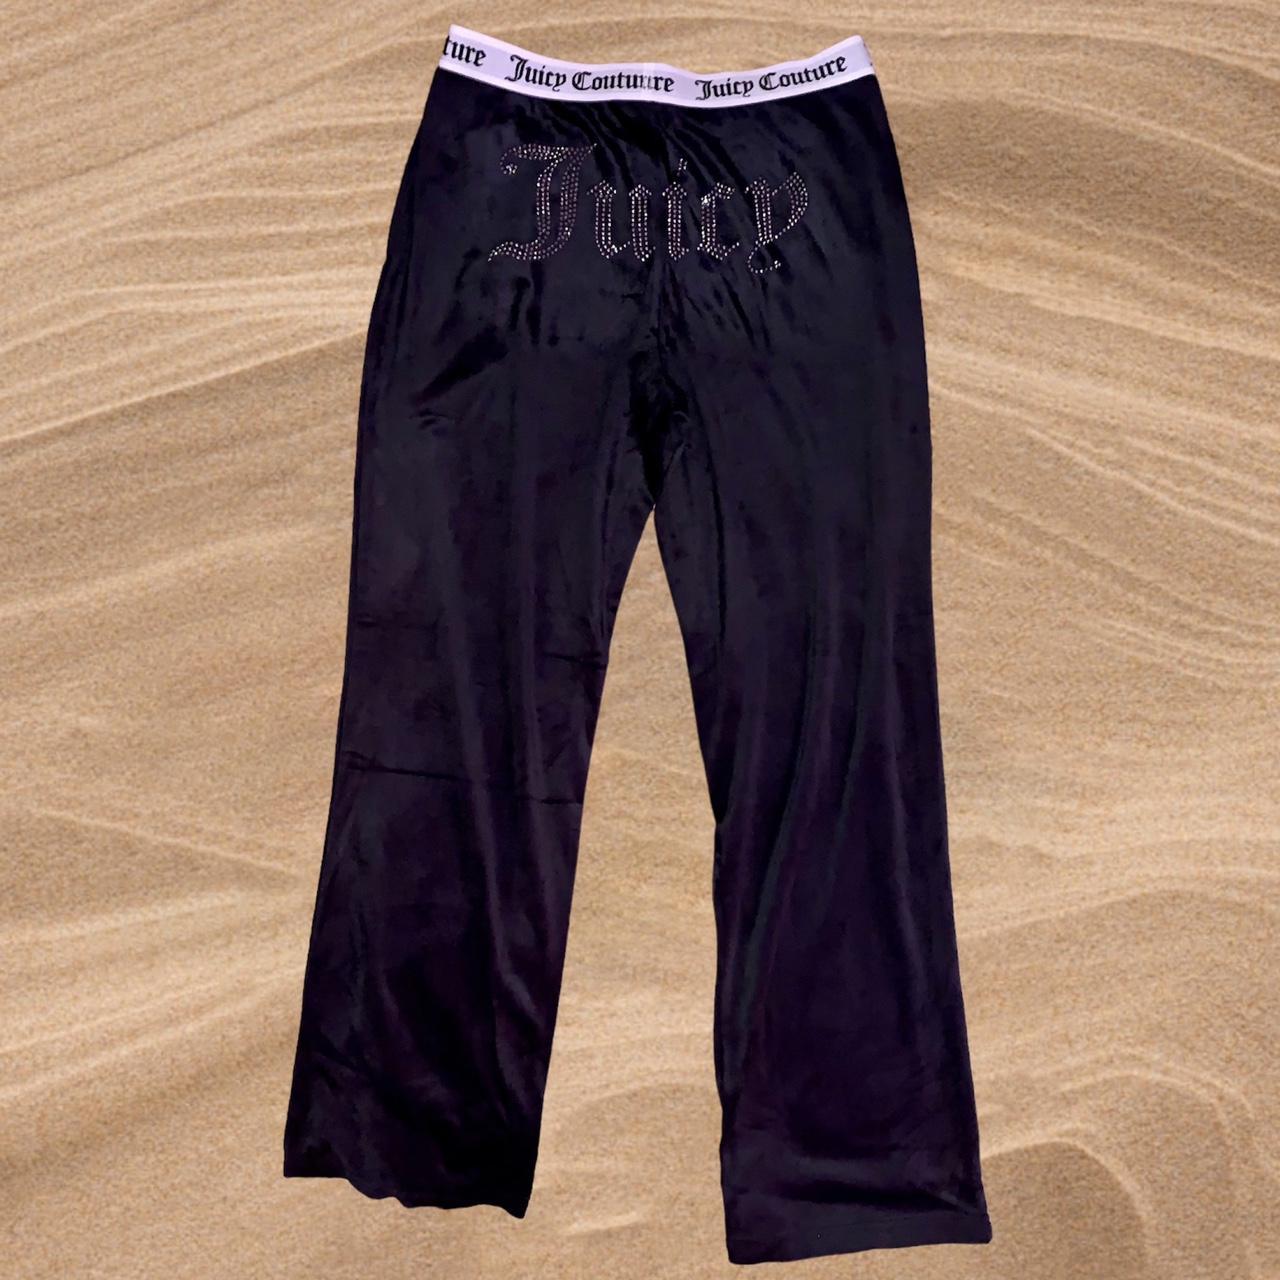 Juicy Couture Women's Silver and Black Trousers (2)